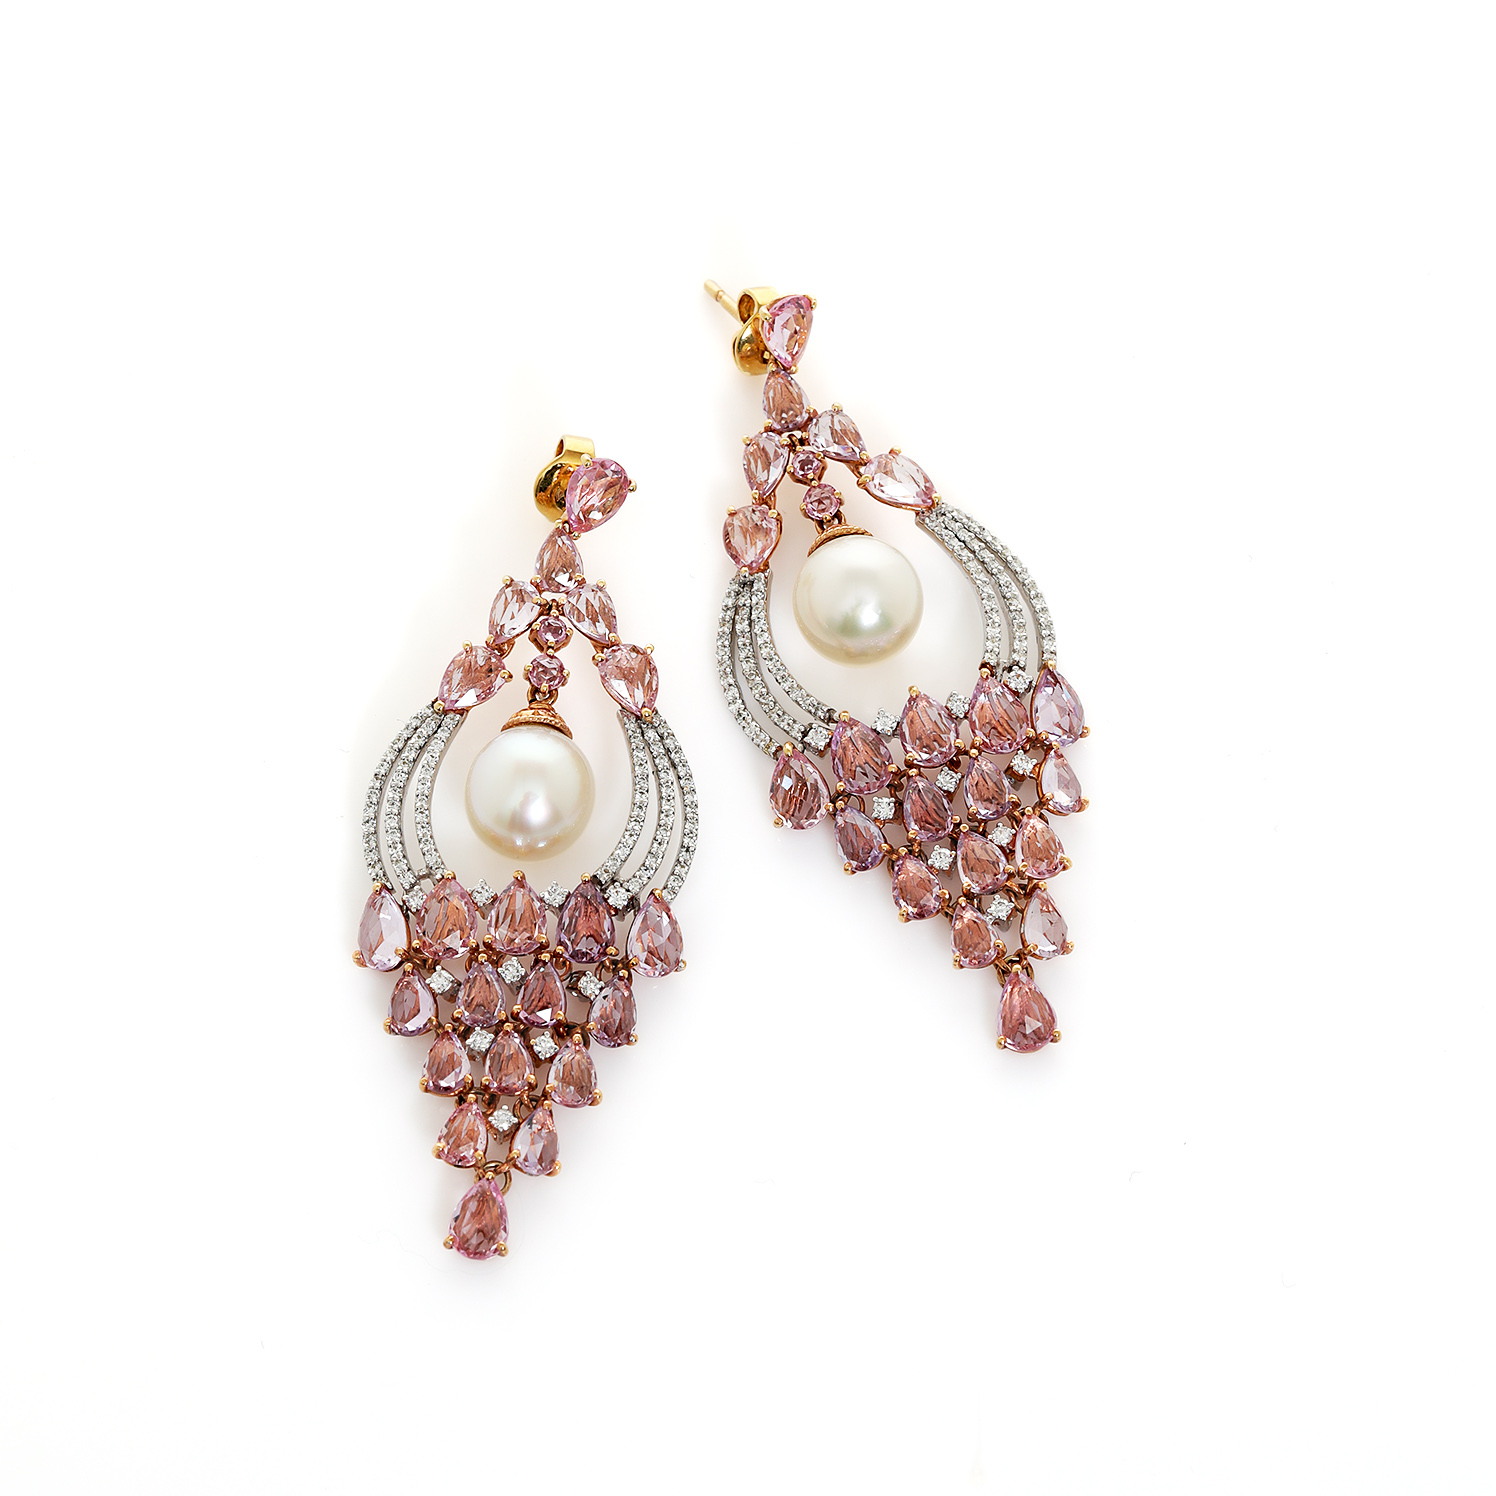 18ct Rose gold diamond earrings with south sea pearls